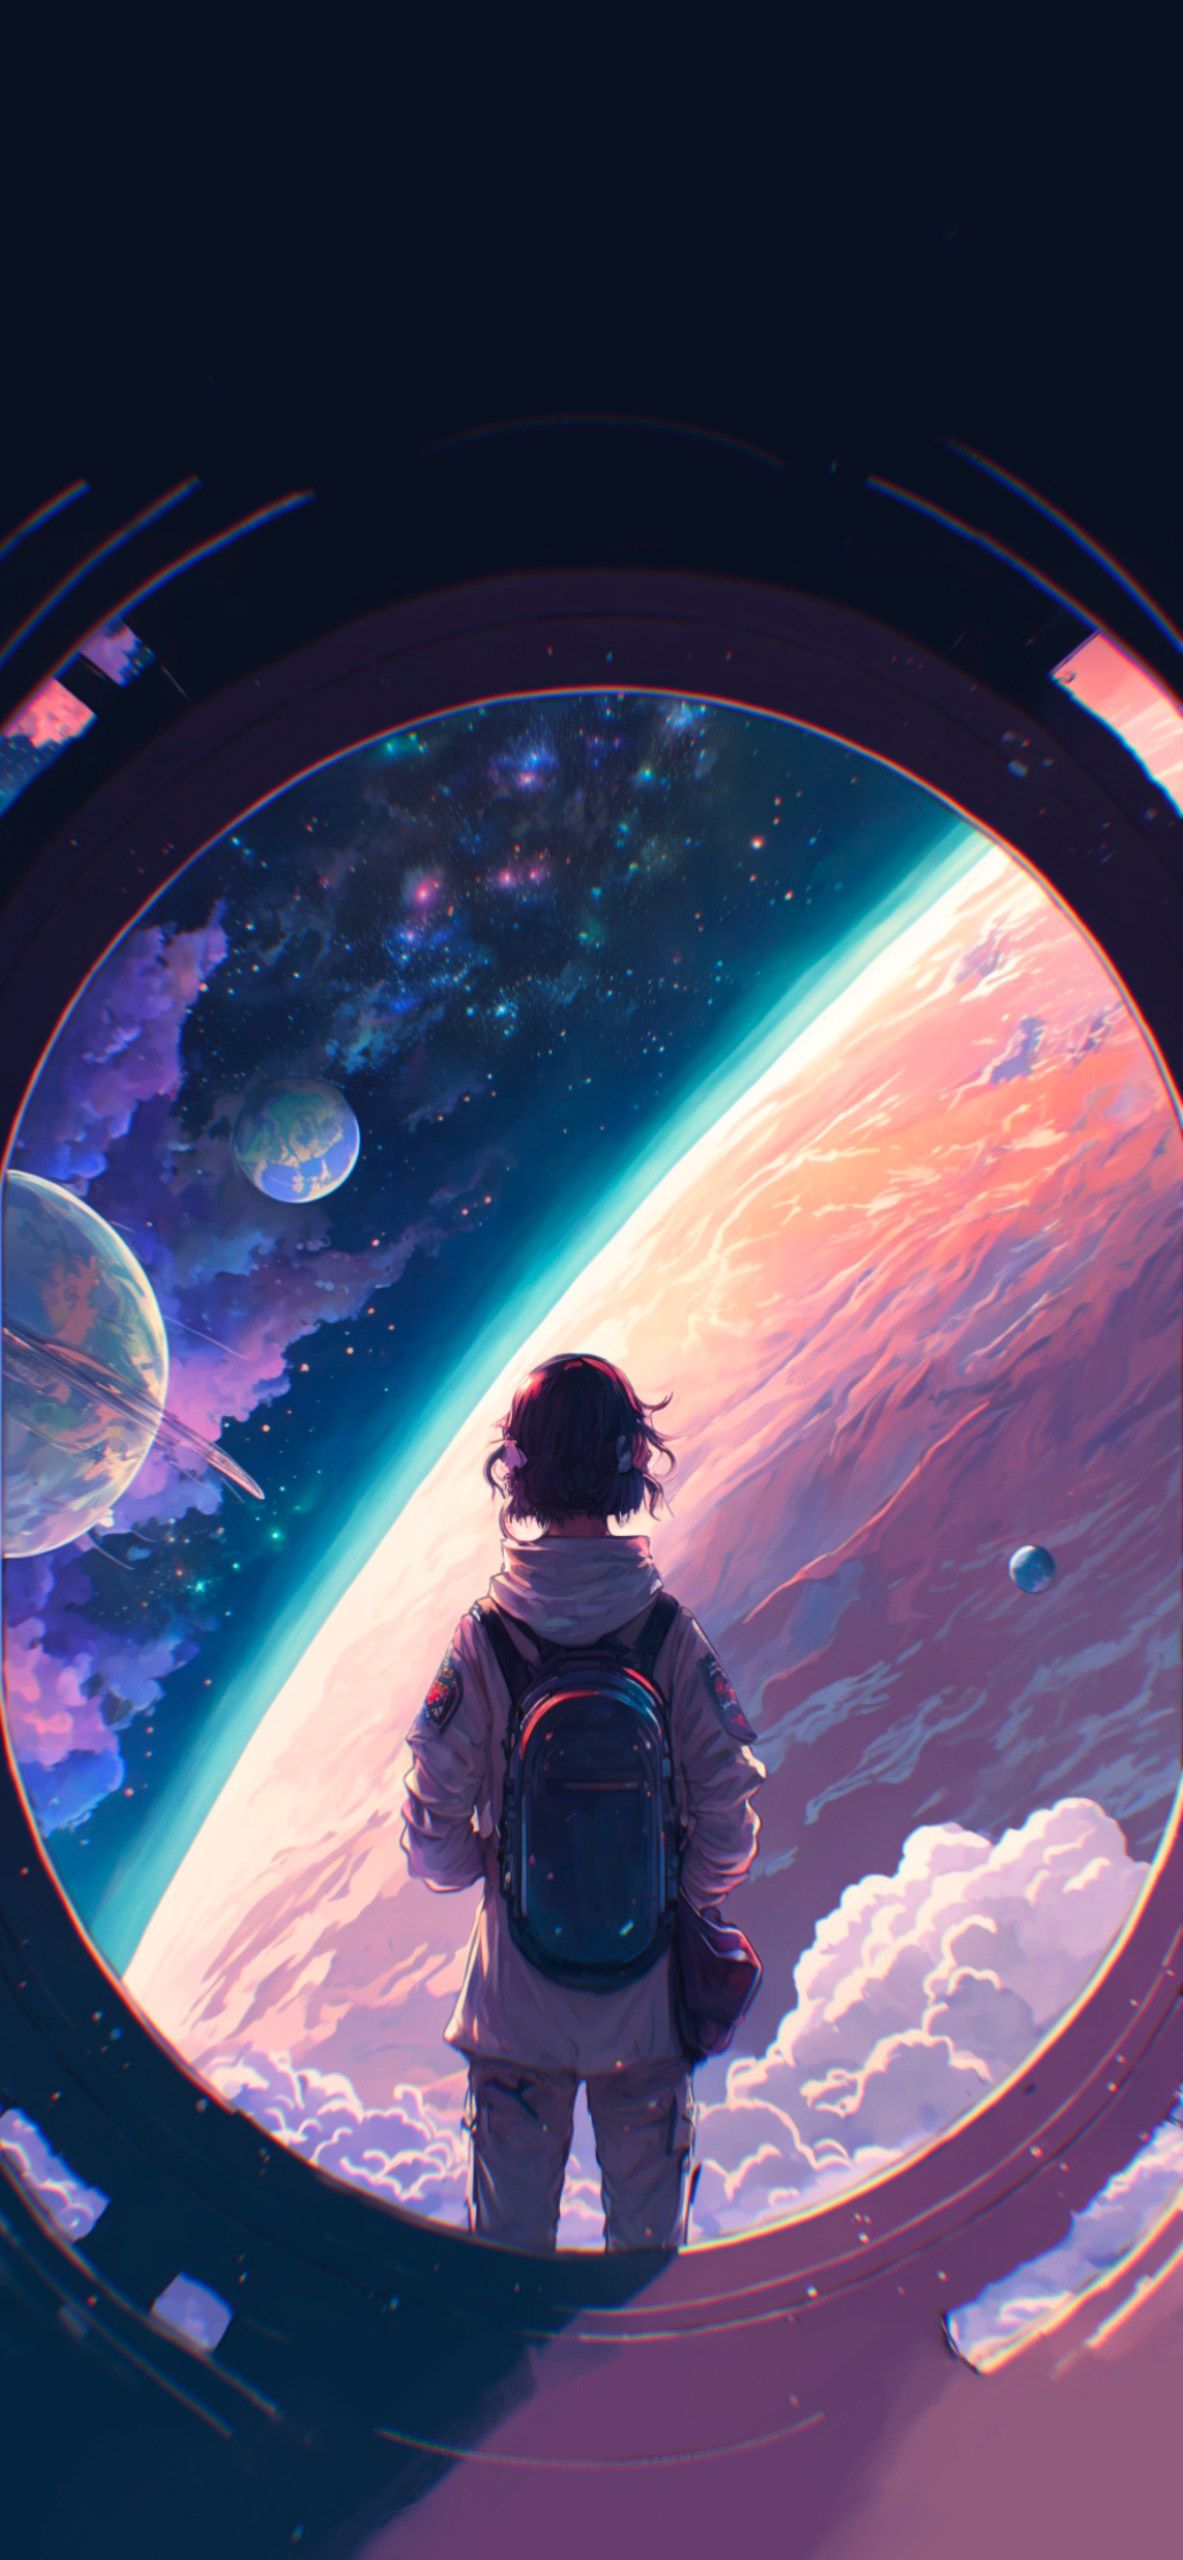 1440x2560 anime, sci-fi, digital art, planets, stars, backpack, clouds, illustration, space, 1440x2560 wallpaper - Space